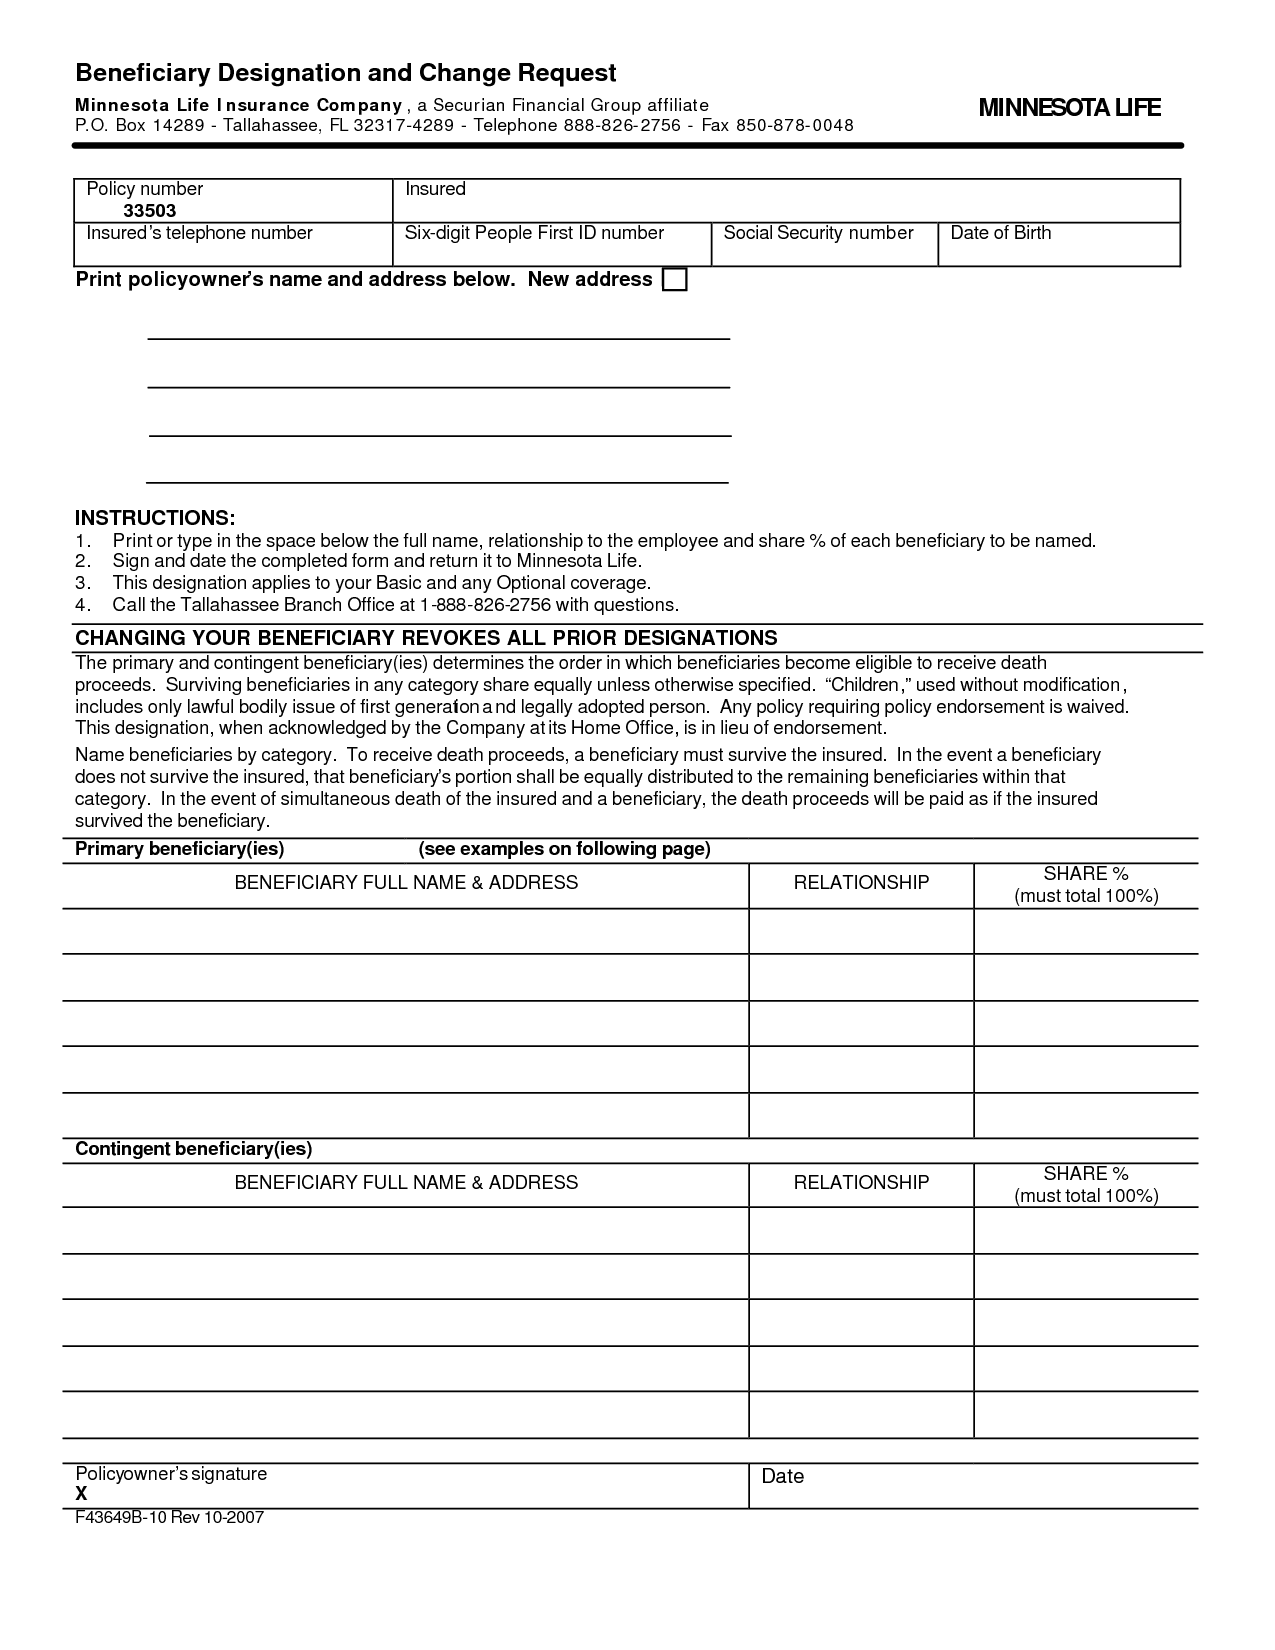 printable-office-forms-printable-forms-free-online